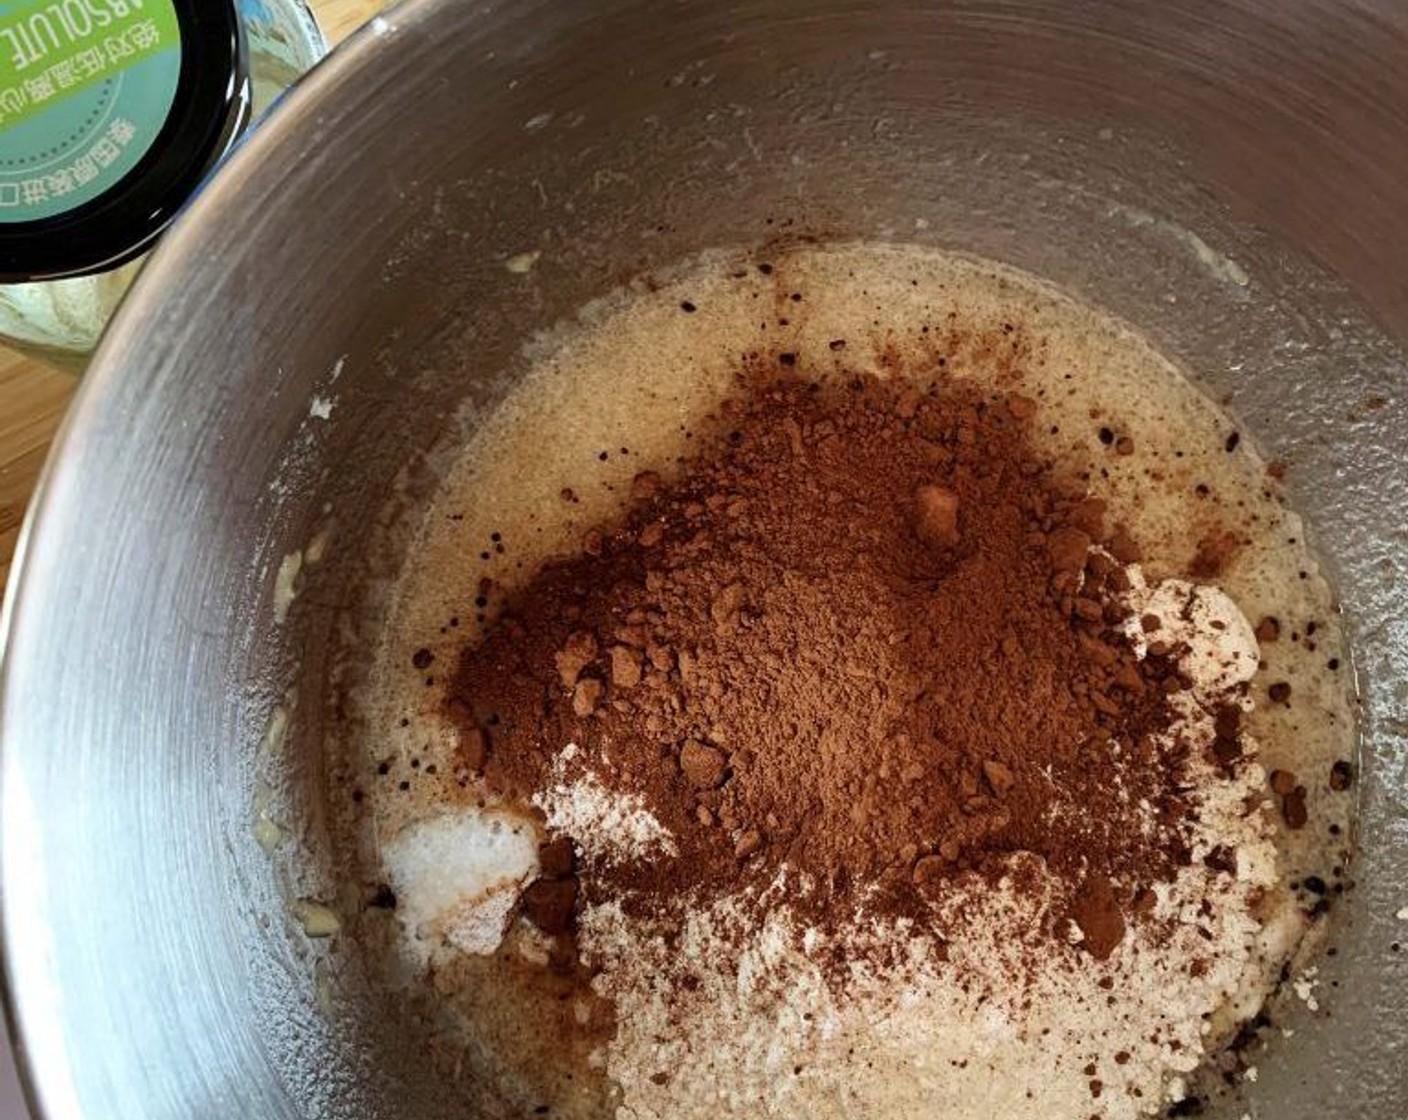 step 3 Add the Coconut Oil (1/4 cup) and Water (3/4 cup) and mix well. Next fold in All-Purpose Flour (1 2/3 cups), Unsweetened Cocoa Powder (1/2 cup), and Baking Powder (1 tsp).